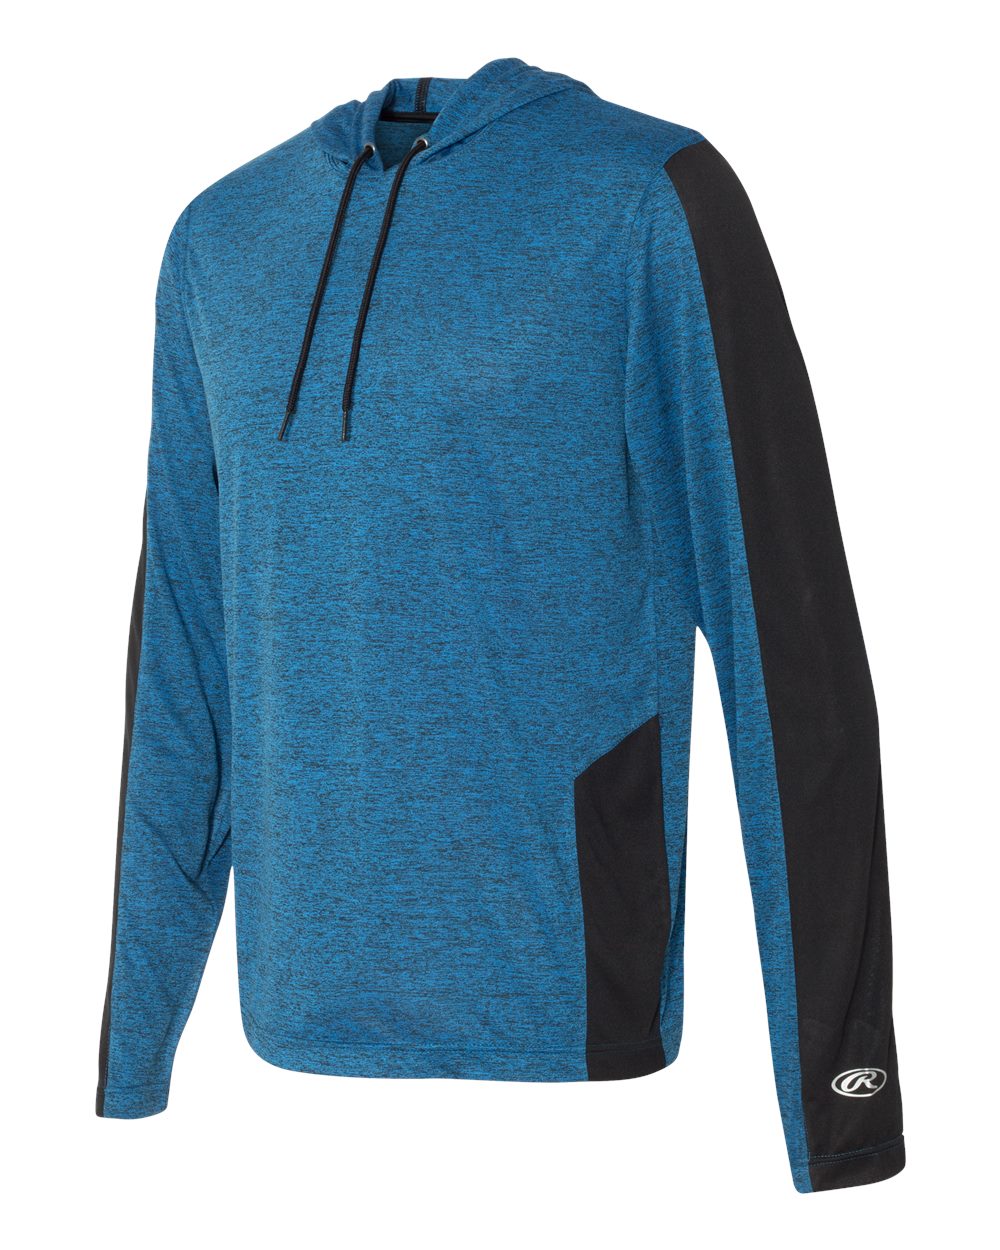 Rawlings 8199 - Performance Cationic Hooded Pullover T-Shirt